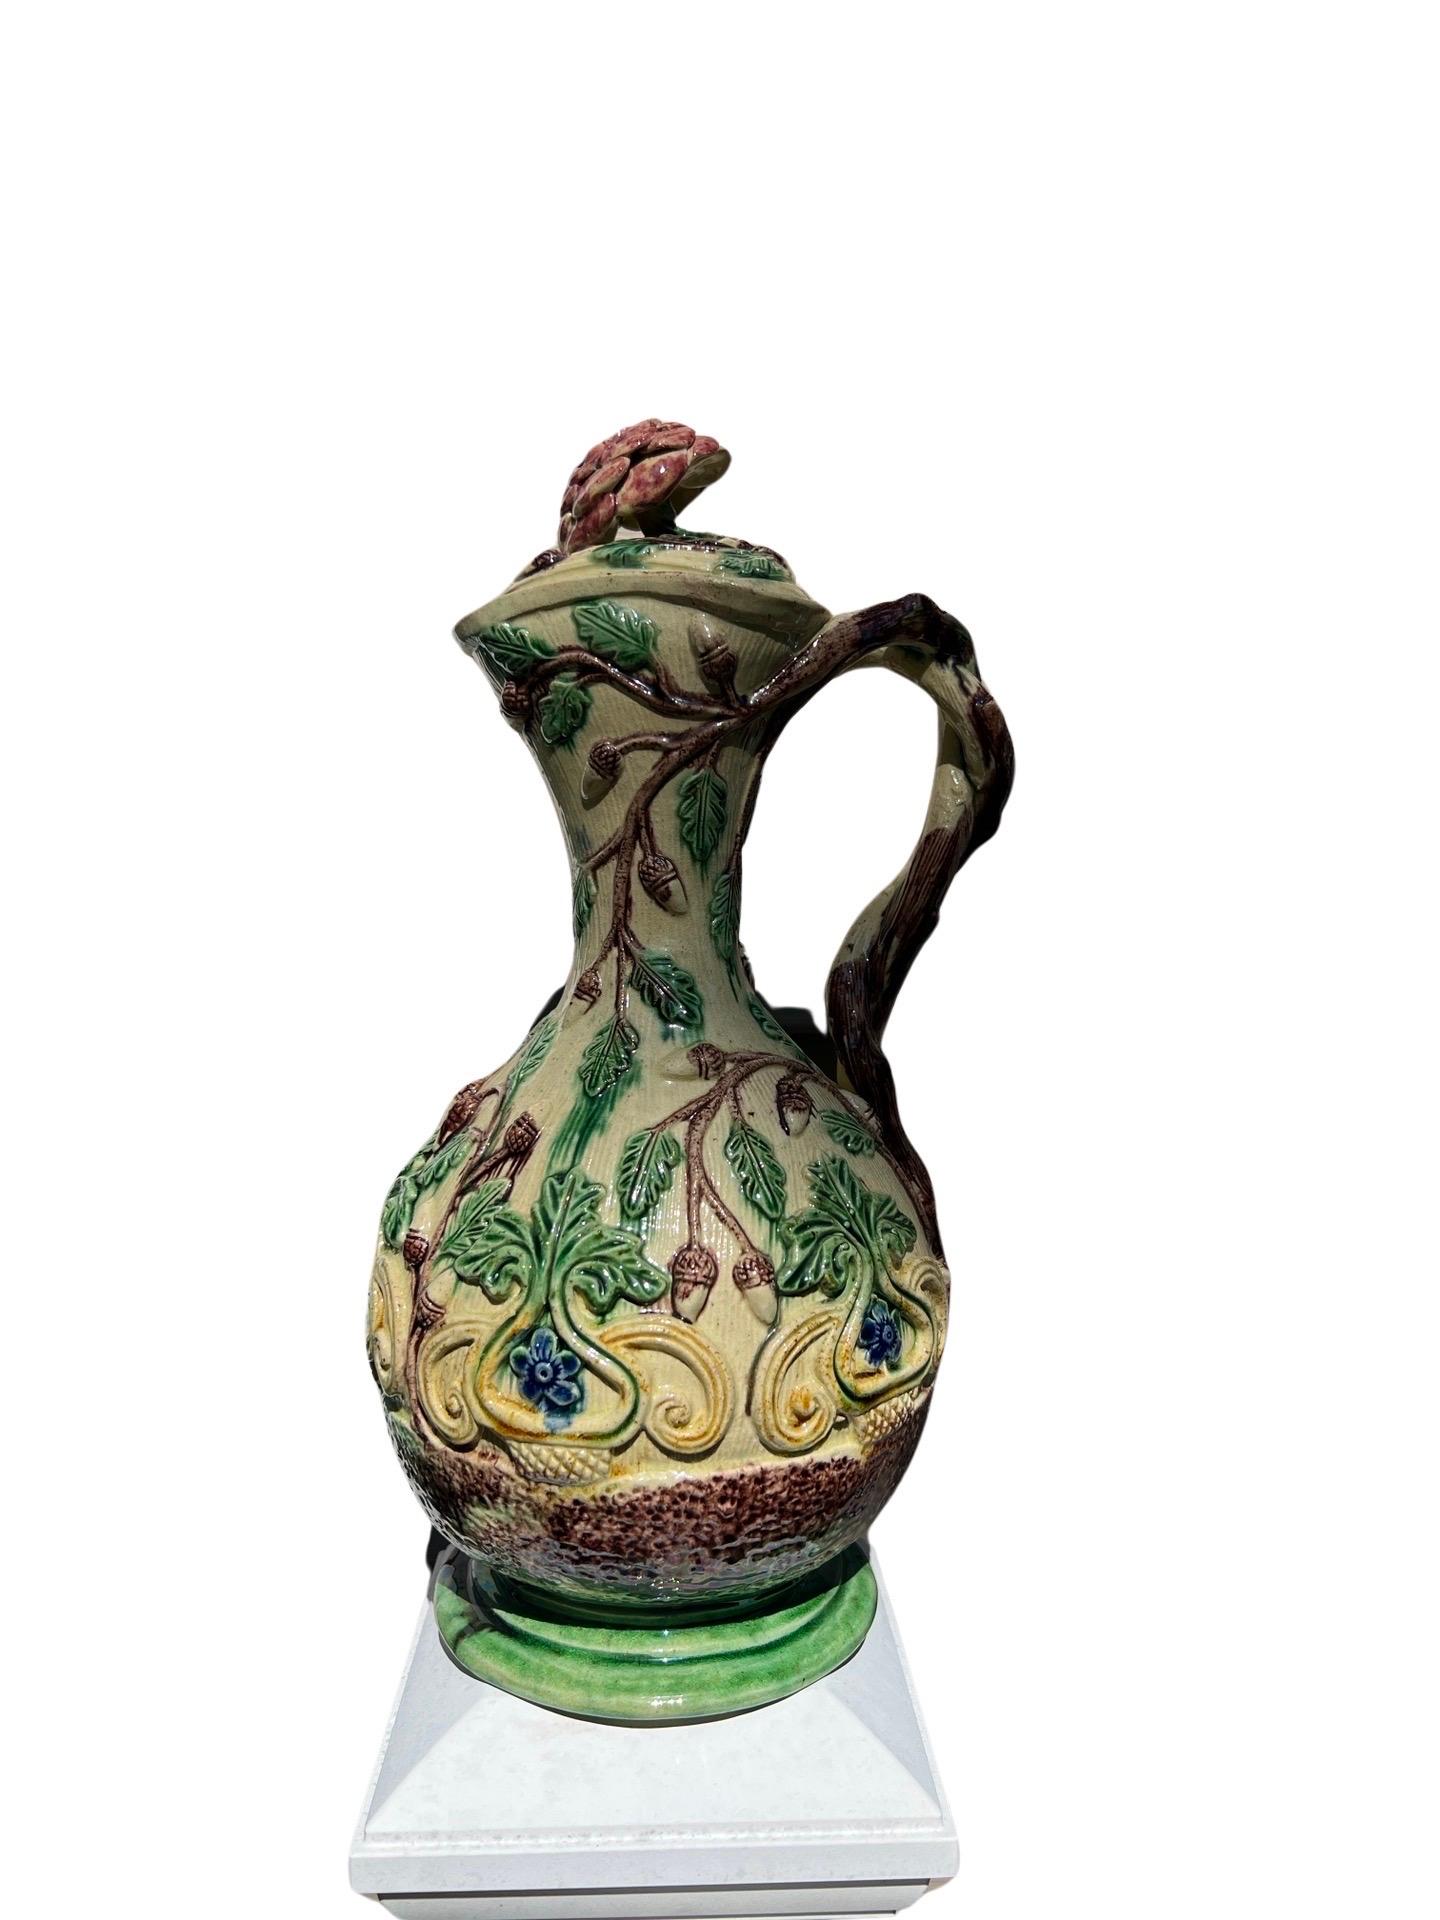 Continental, 19th century.

A finely detailed continental majolica or palissy ware pitcher. The ewer has hand applied foliate and acorn motifs the body. The handle constructed of an intertwining tree branch and a removable lid with rosette finial.